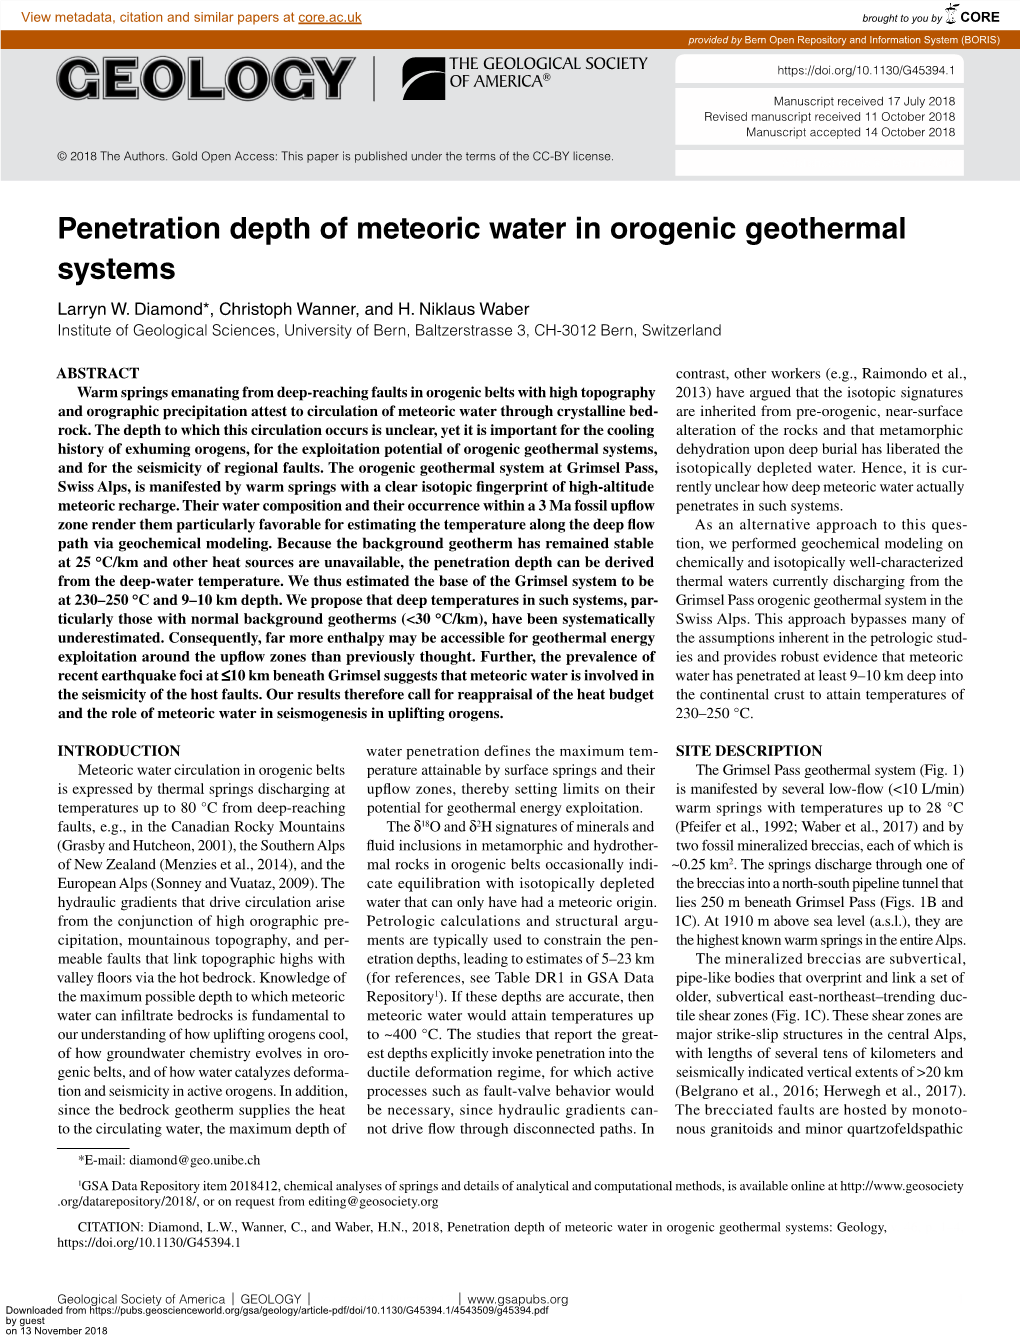 Penetration Depth of Meteoric Water in Orogenic Geothermal Systems Larryn W